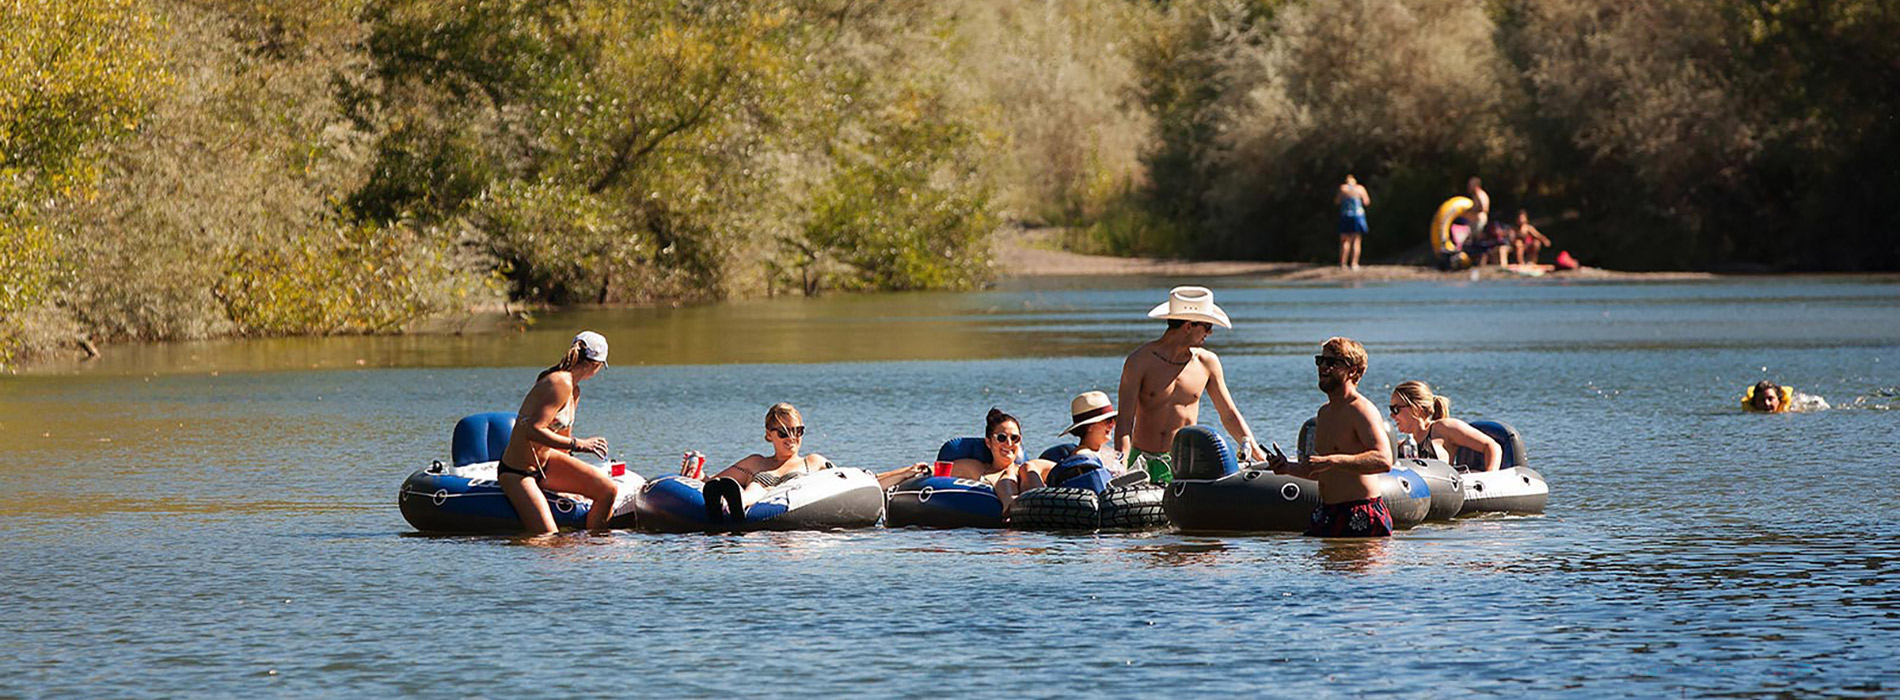 Tubing the Russian River - how to plan a float trip